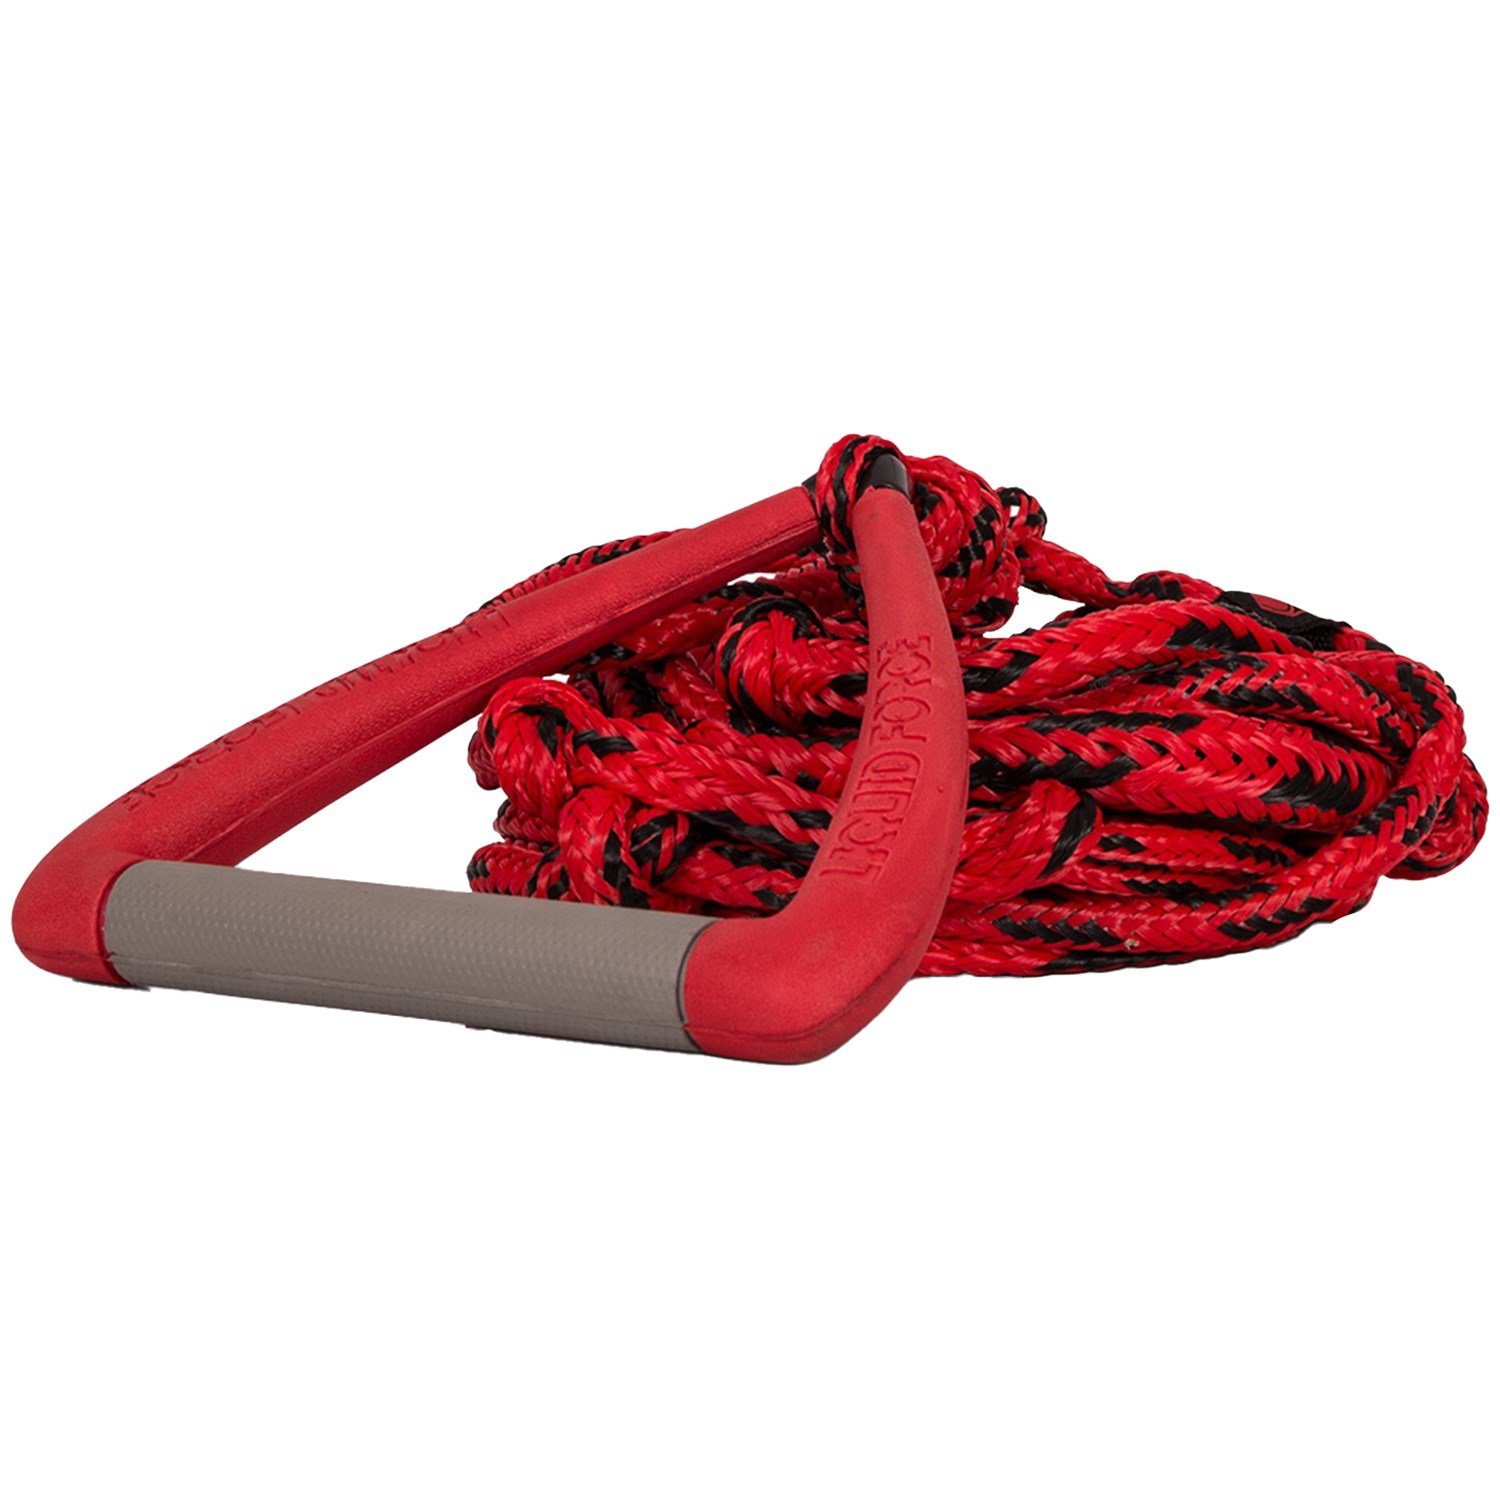 Liquid Force DLX Surf Rope - Red